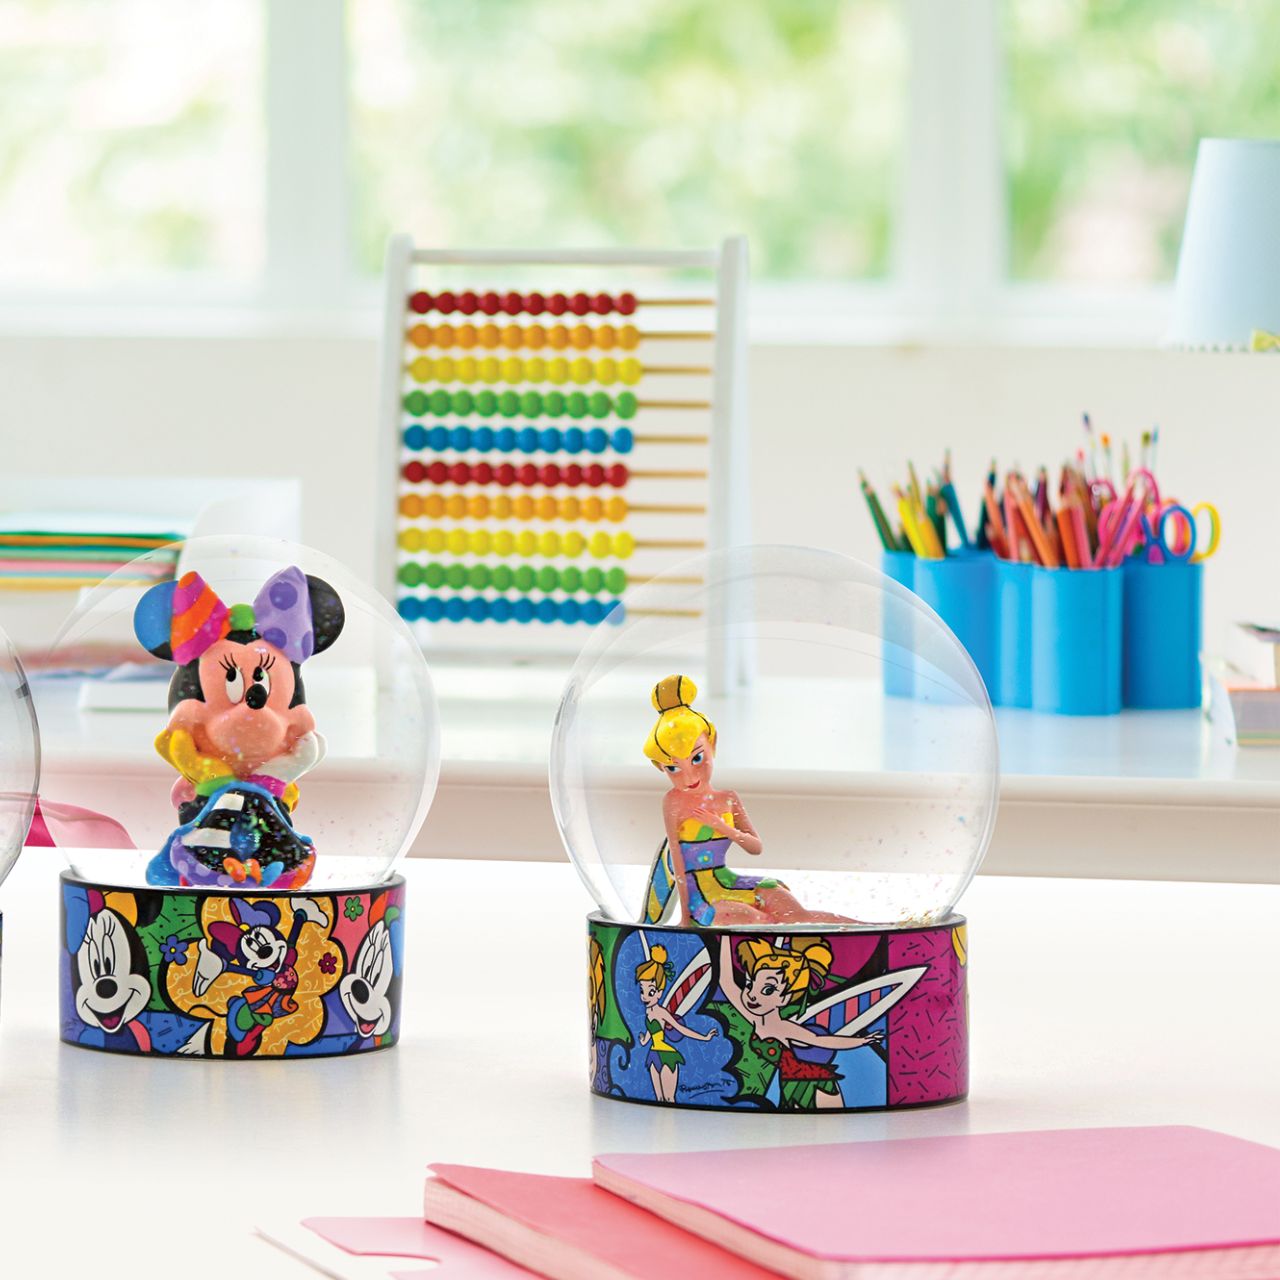 Romero Britto Tinker Bell Snow Globe  Tink, the feisty, fluttering fairy is here in a colourfully creative dreamland. Give it a shake and fly away to a magical world designed by Romero Britto.